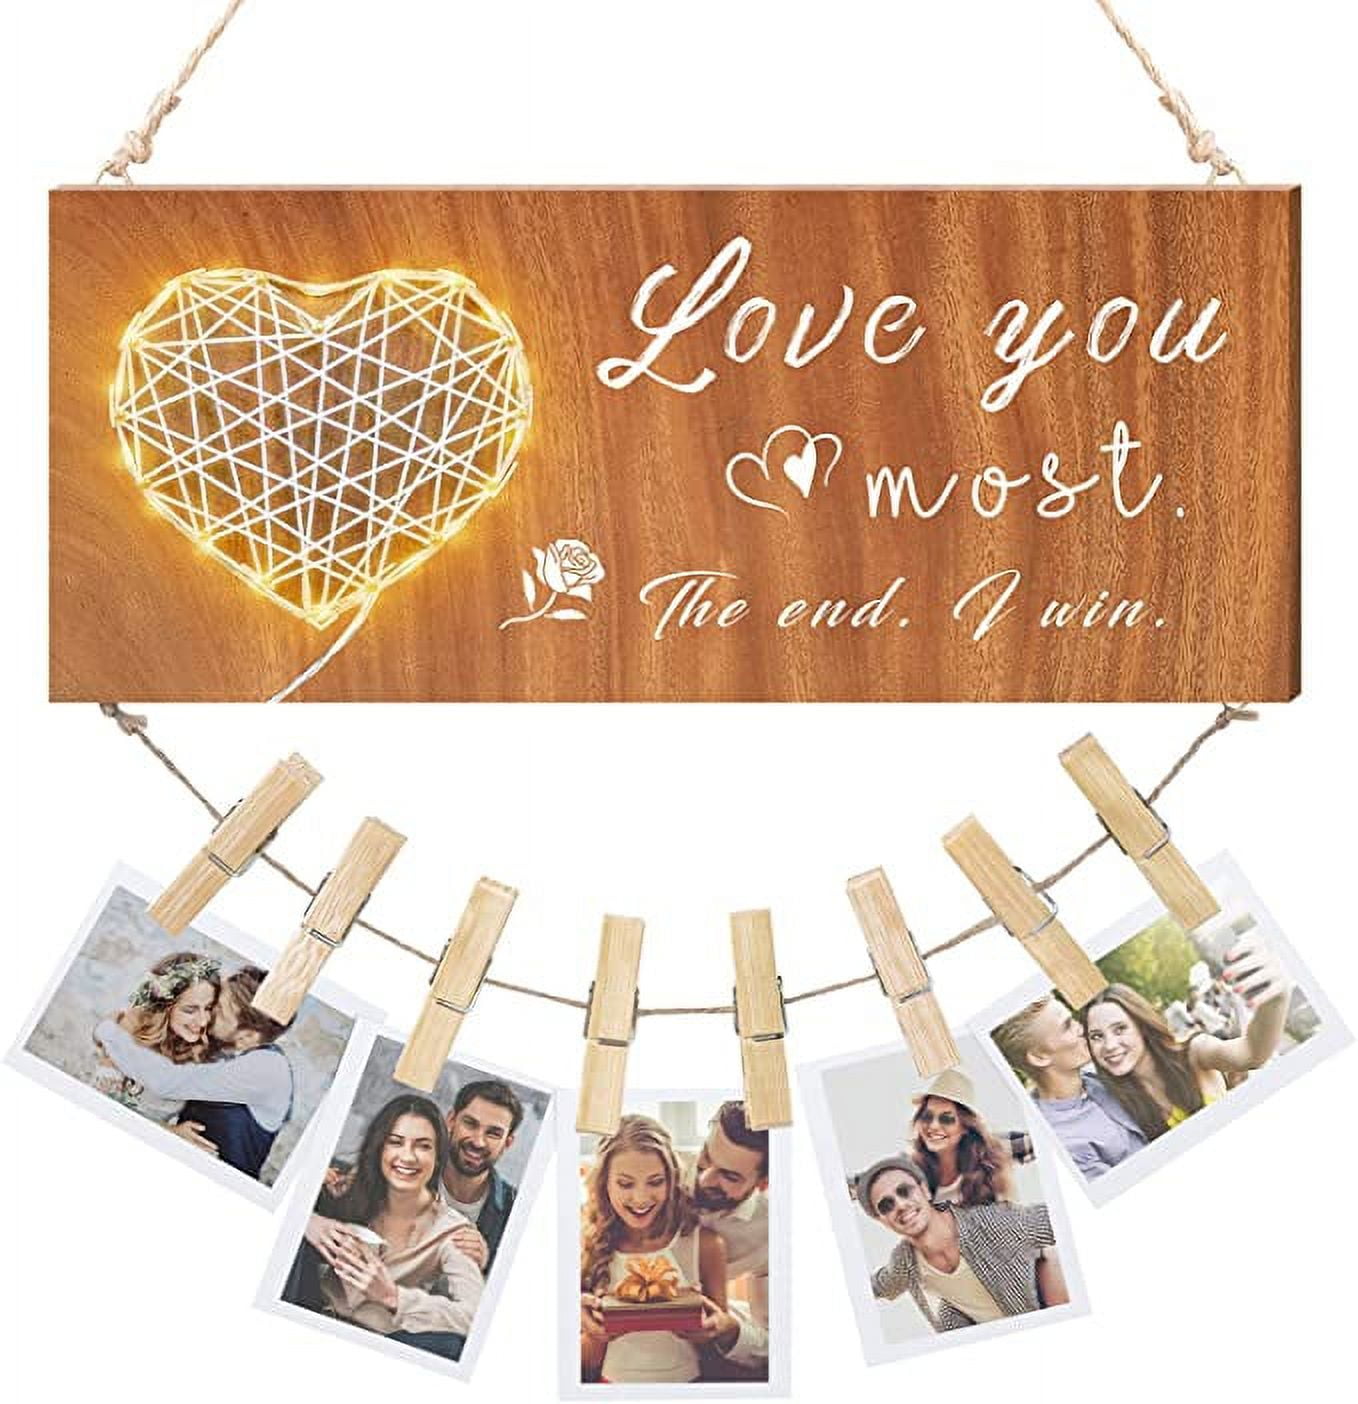 DAISRED Valentines Day Gifts for Boyfriend Girlfriend Husband Wife, Couples  Gifts Picture Frame Couples Christmas Gifts - Love You Most, The End. I